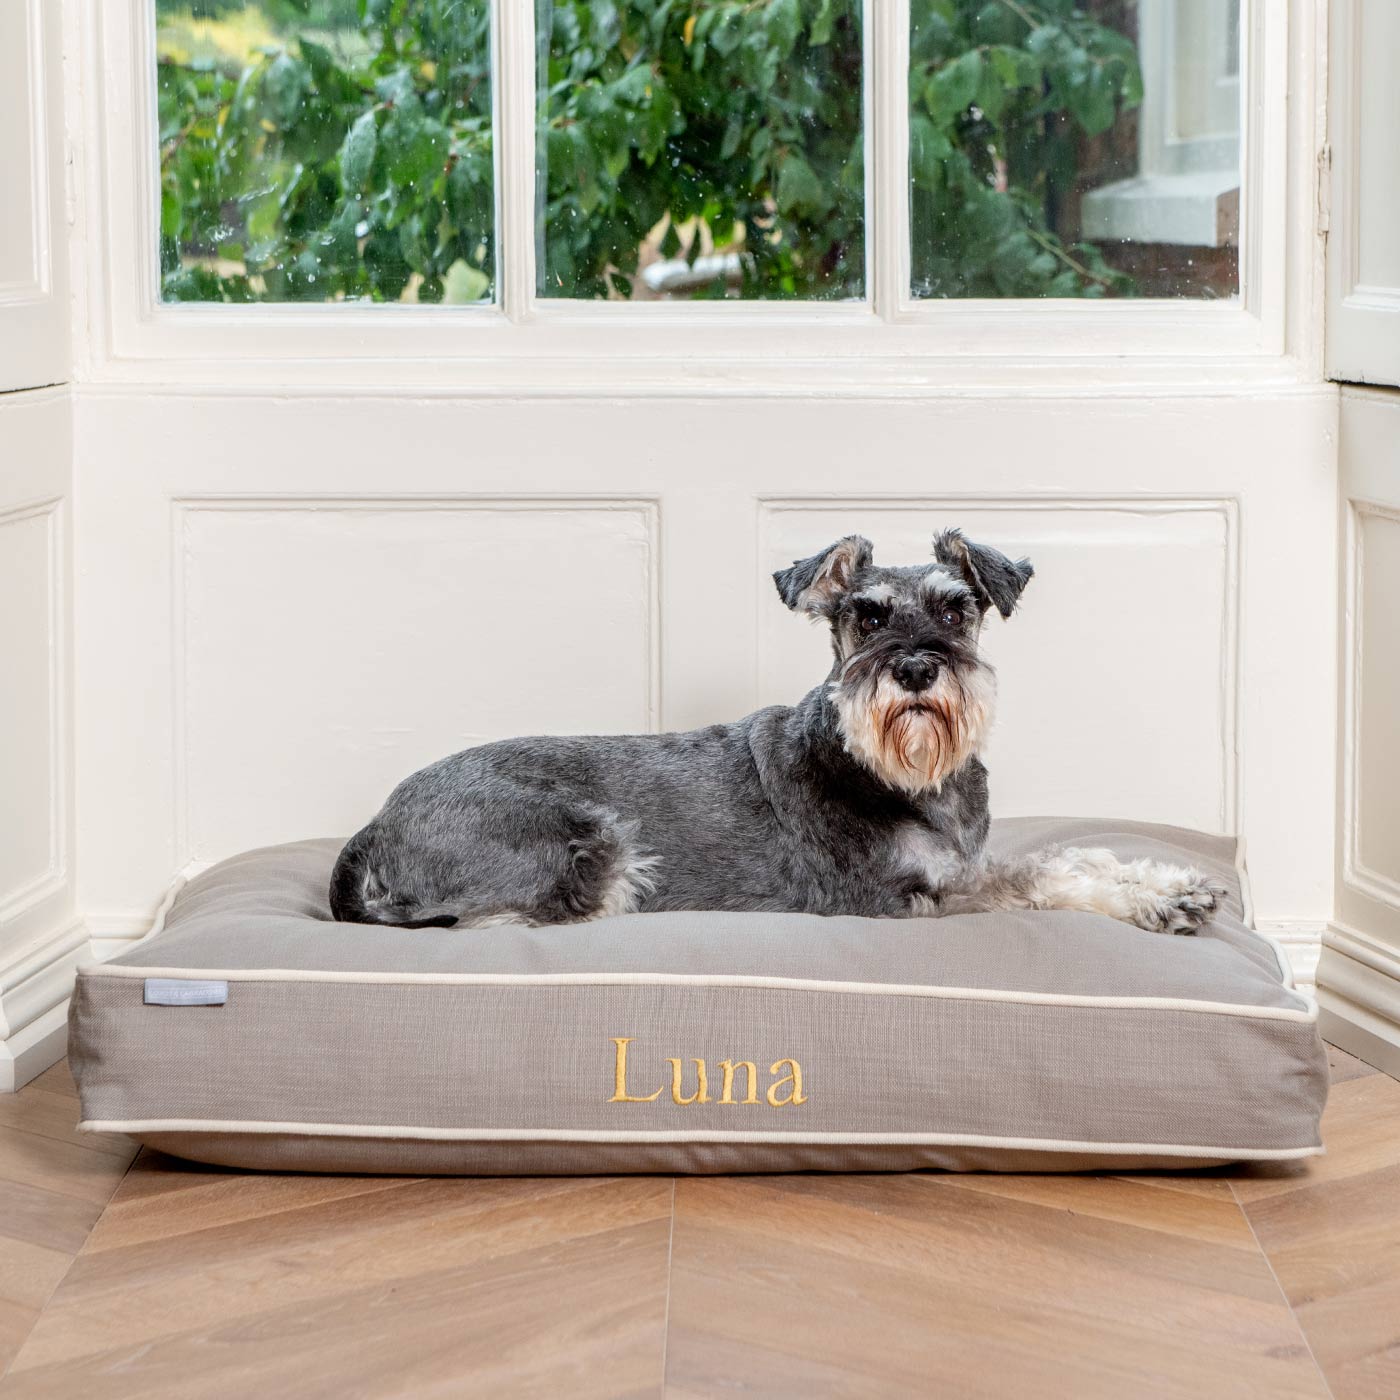 Luxury Dog Crate Cushion, Savanna Stone Crate Cushion The Perfect Dog Crate Accessory, Available To Personalise Now at Lords & Labradors